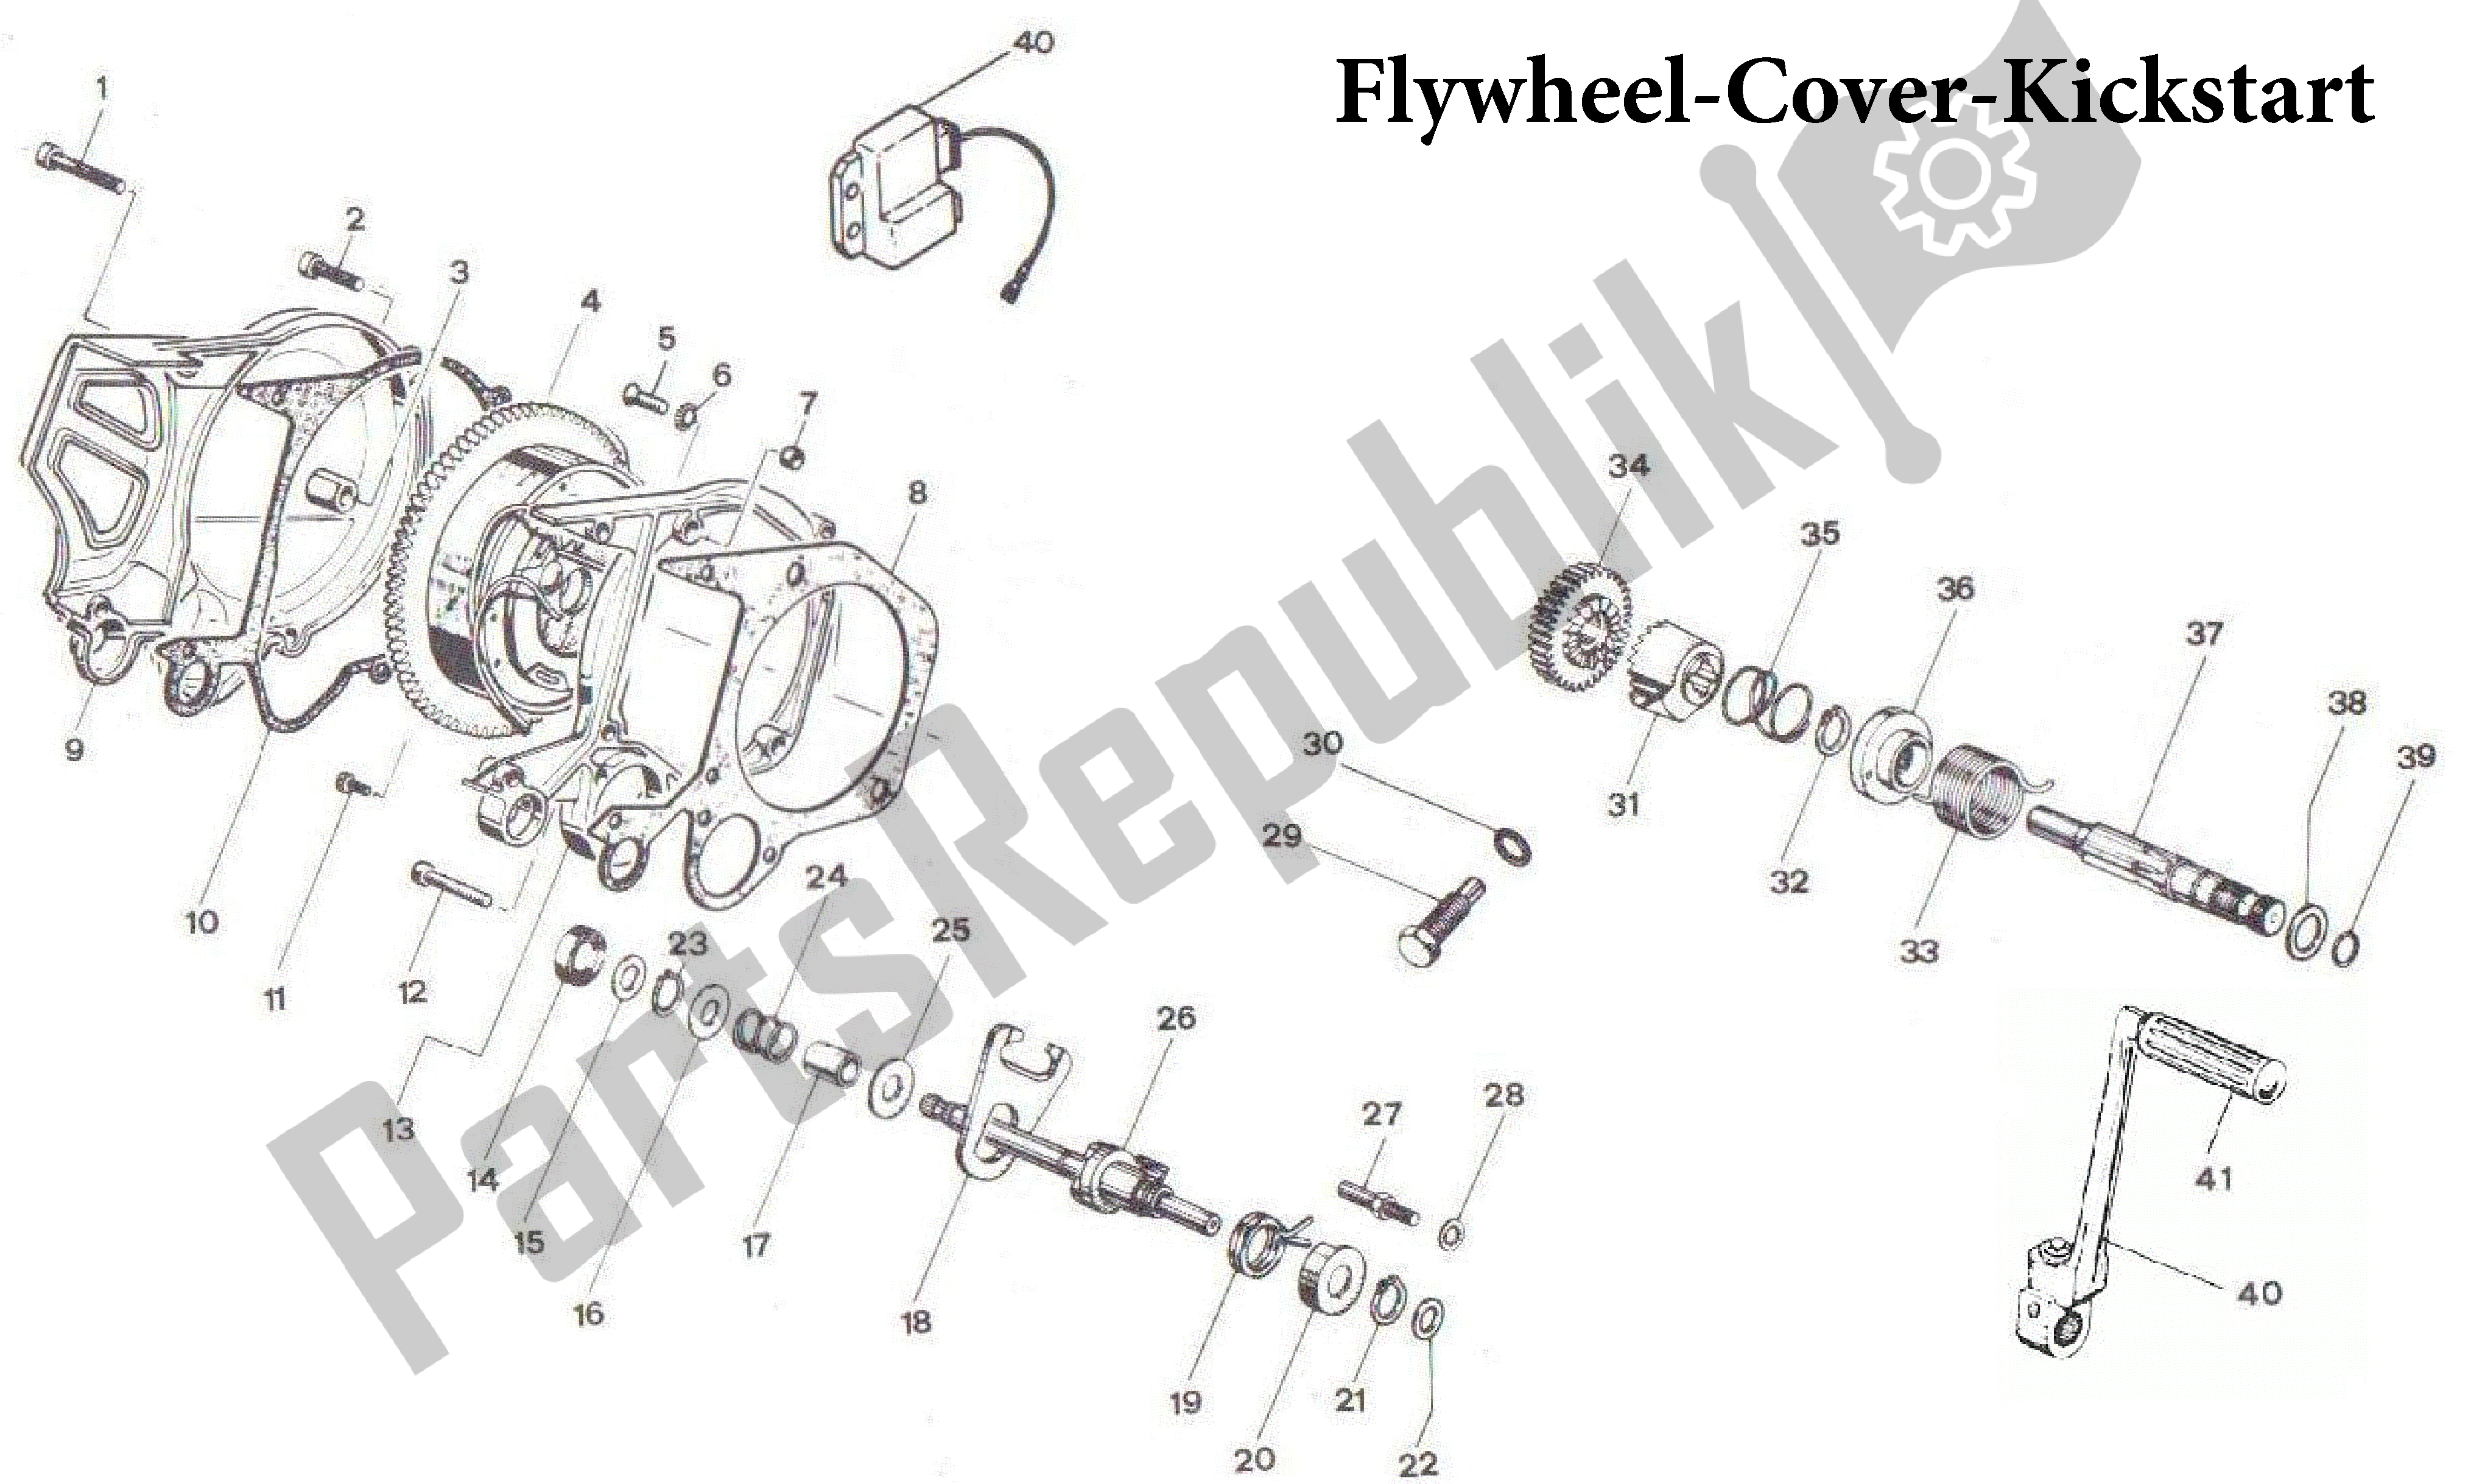 All parts for the Flywheel-cover-kickstart of the Aprilia RX 50 1989